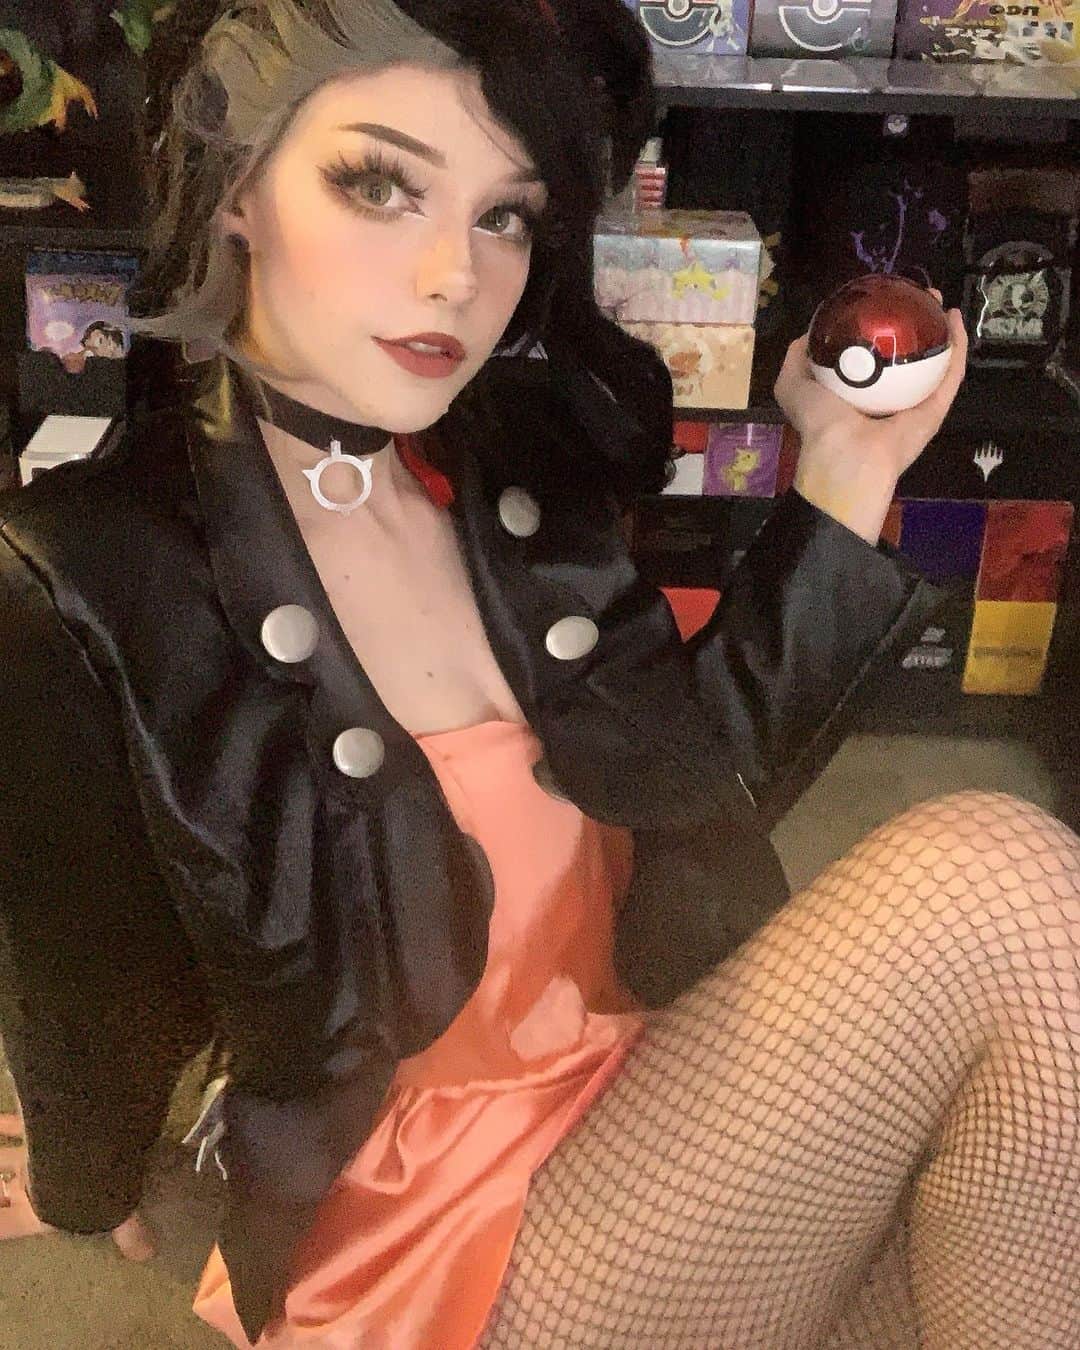 Nicole Eevee Davisのインスタグラム：「Has anyone seen my Morpeko? If he doesn’t eat soon he’ll get HANGRY💢>:c  I got snowed in and had to work with bedroom lighting today but I’ll definitely be taking more! Marnie is one of my absolute favorite characters so I want to get some good shots ⛓🖤☁️」